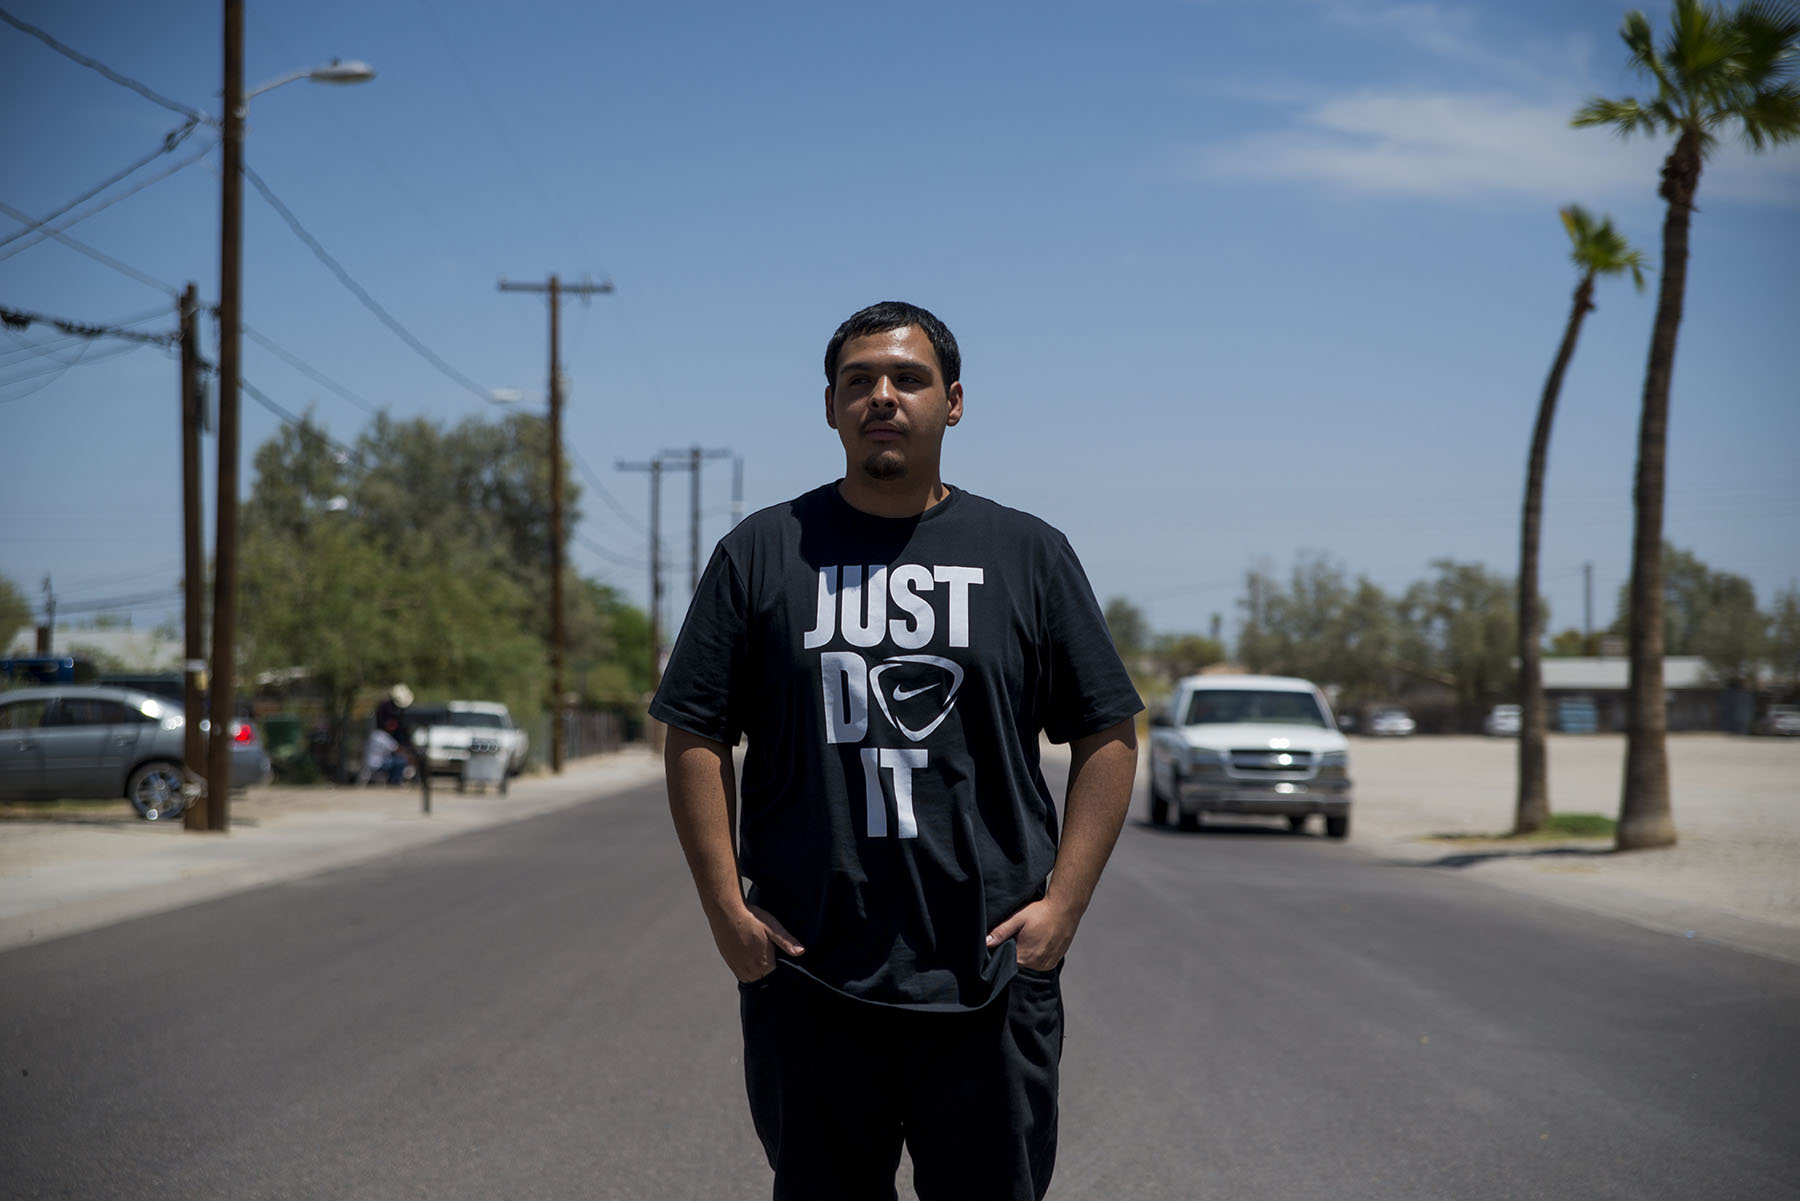 David Castorena, 24, of Chandler, Arizona, stands in the street of a small, largely-Latino community where he attends church. Castorena does not plan to vote in the November election because he thinks Donald Trump will win either way. (Roman Knertser/News21)